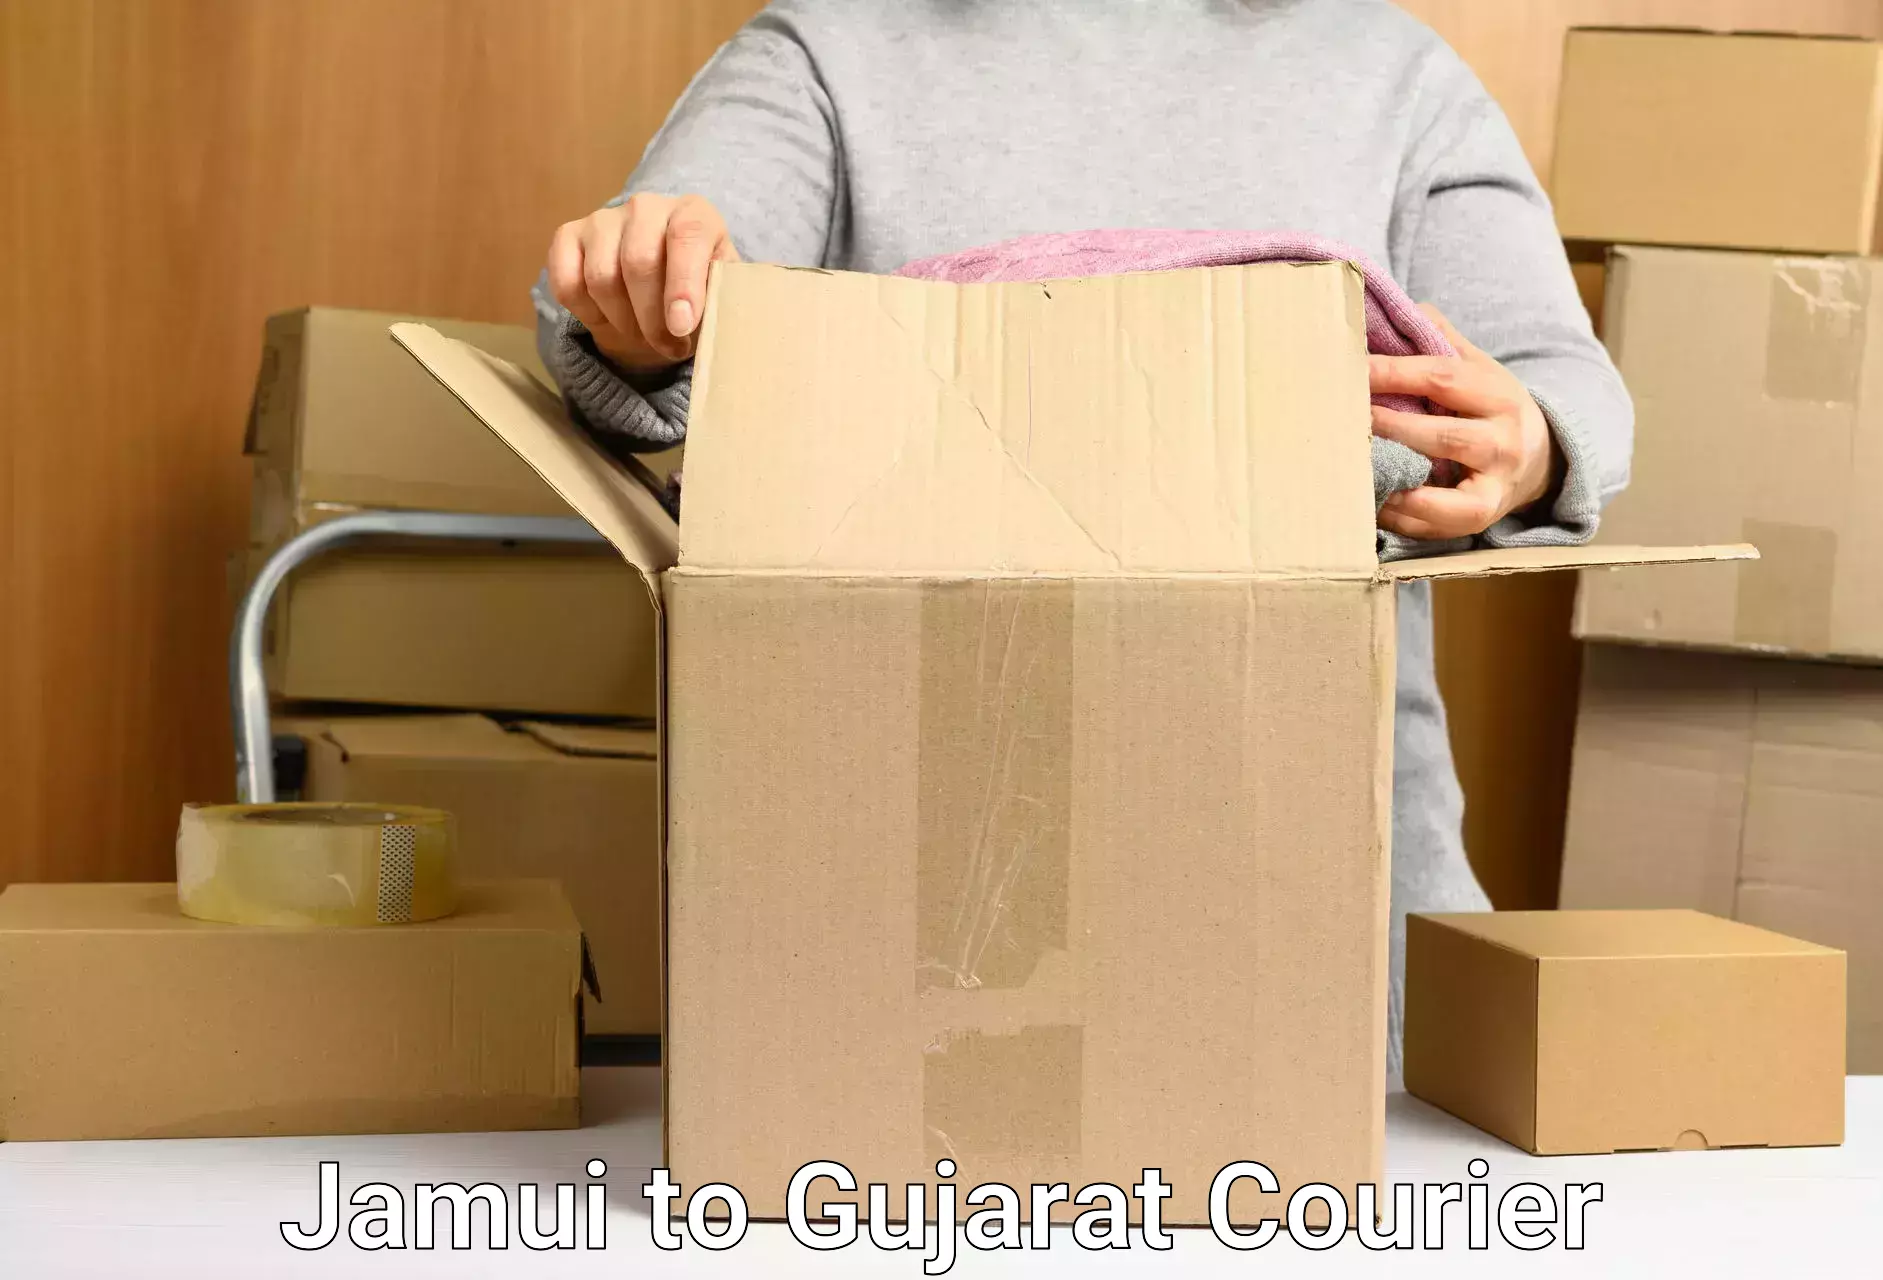 Customized delivery options Jamui to Anjar